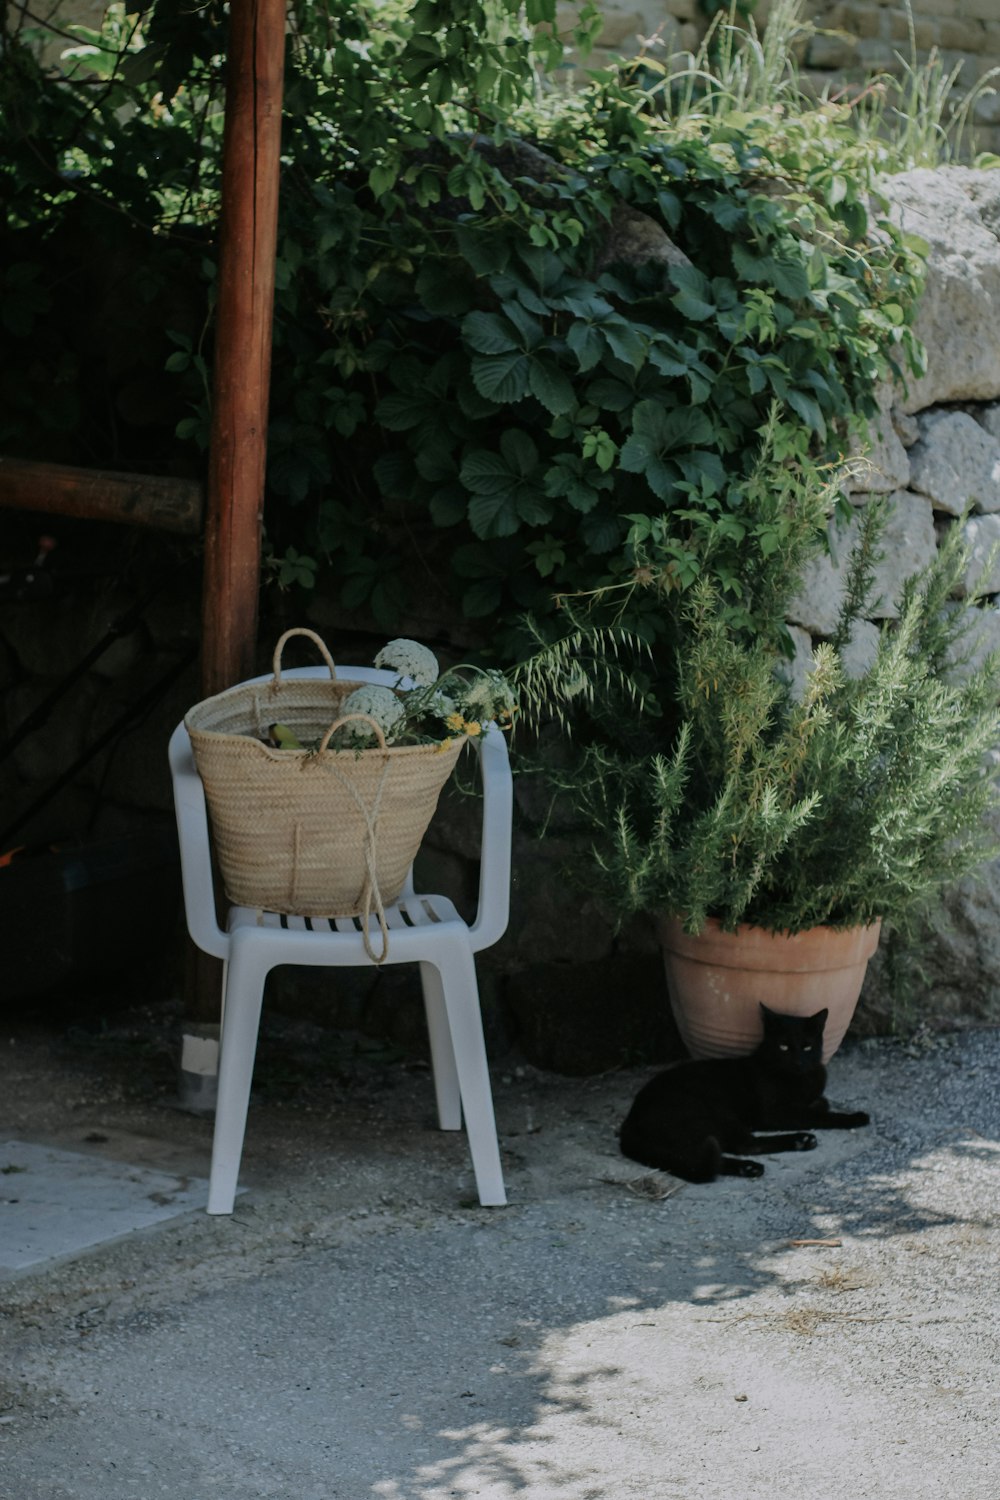 a black cat sitting next to a potted plant